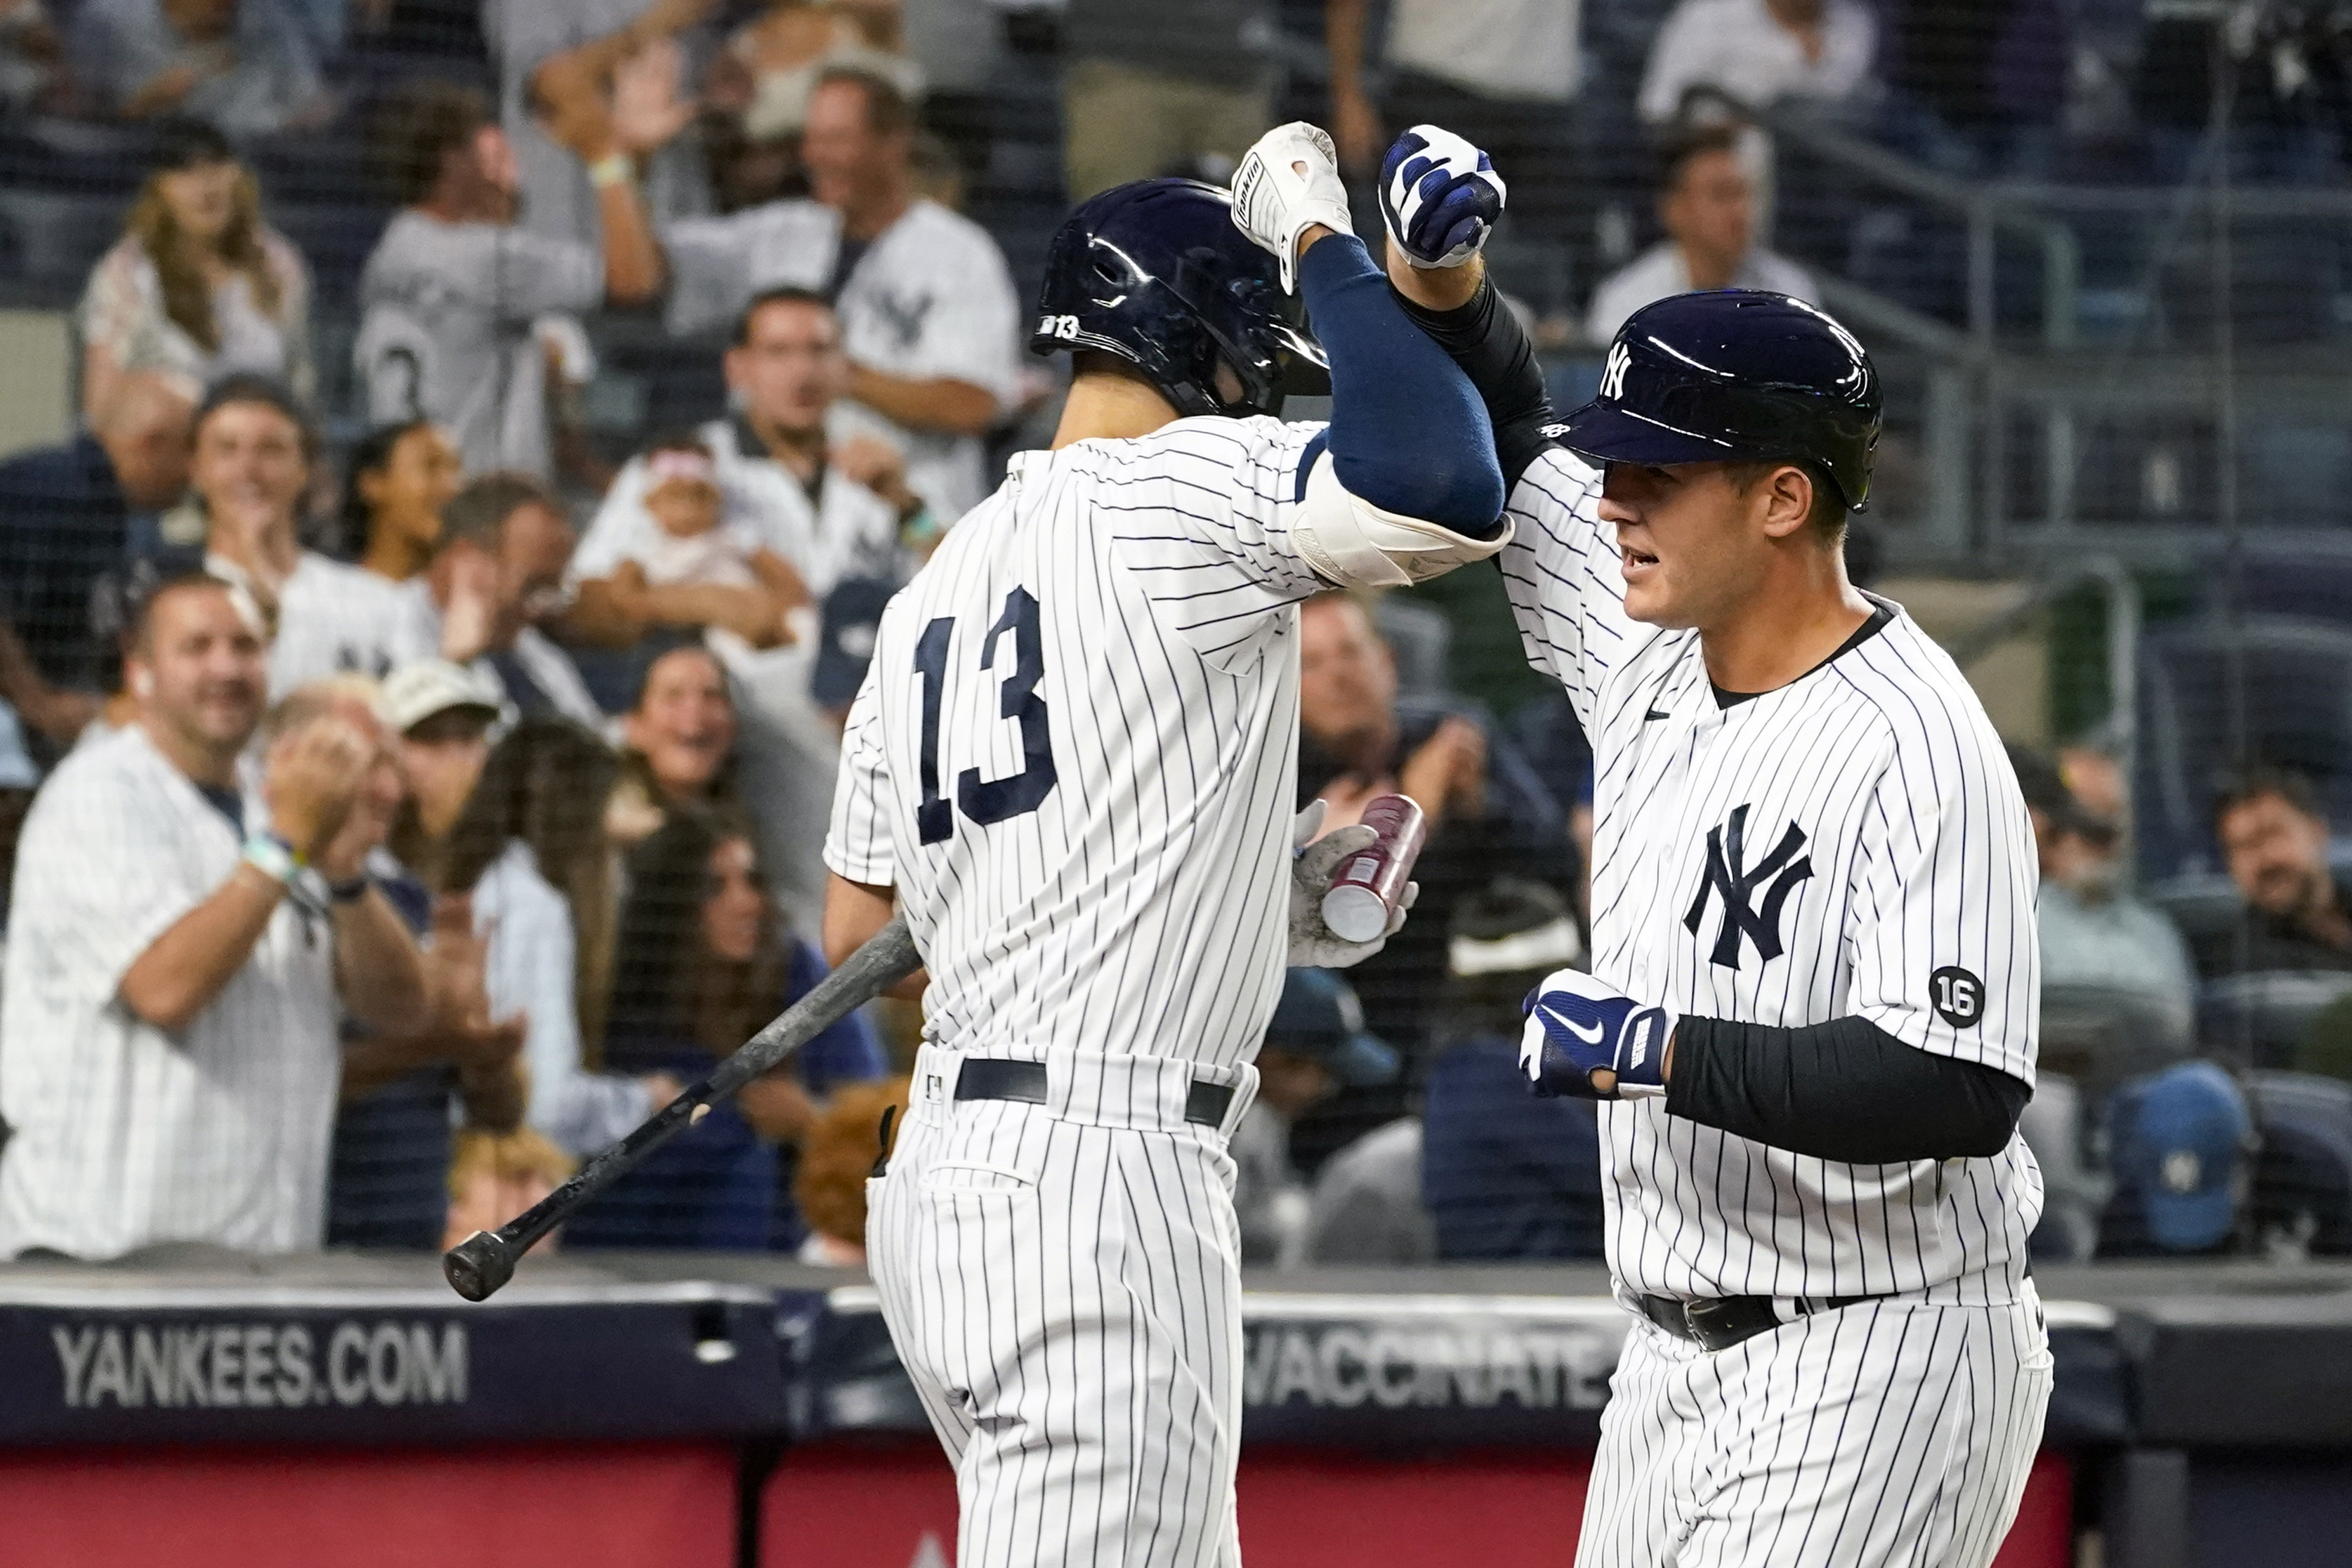 Anthony Rizzo trade is a win-win: Yankees get better AND screw the